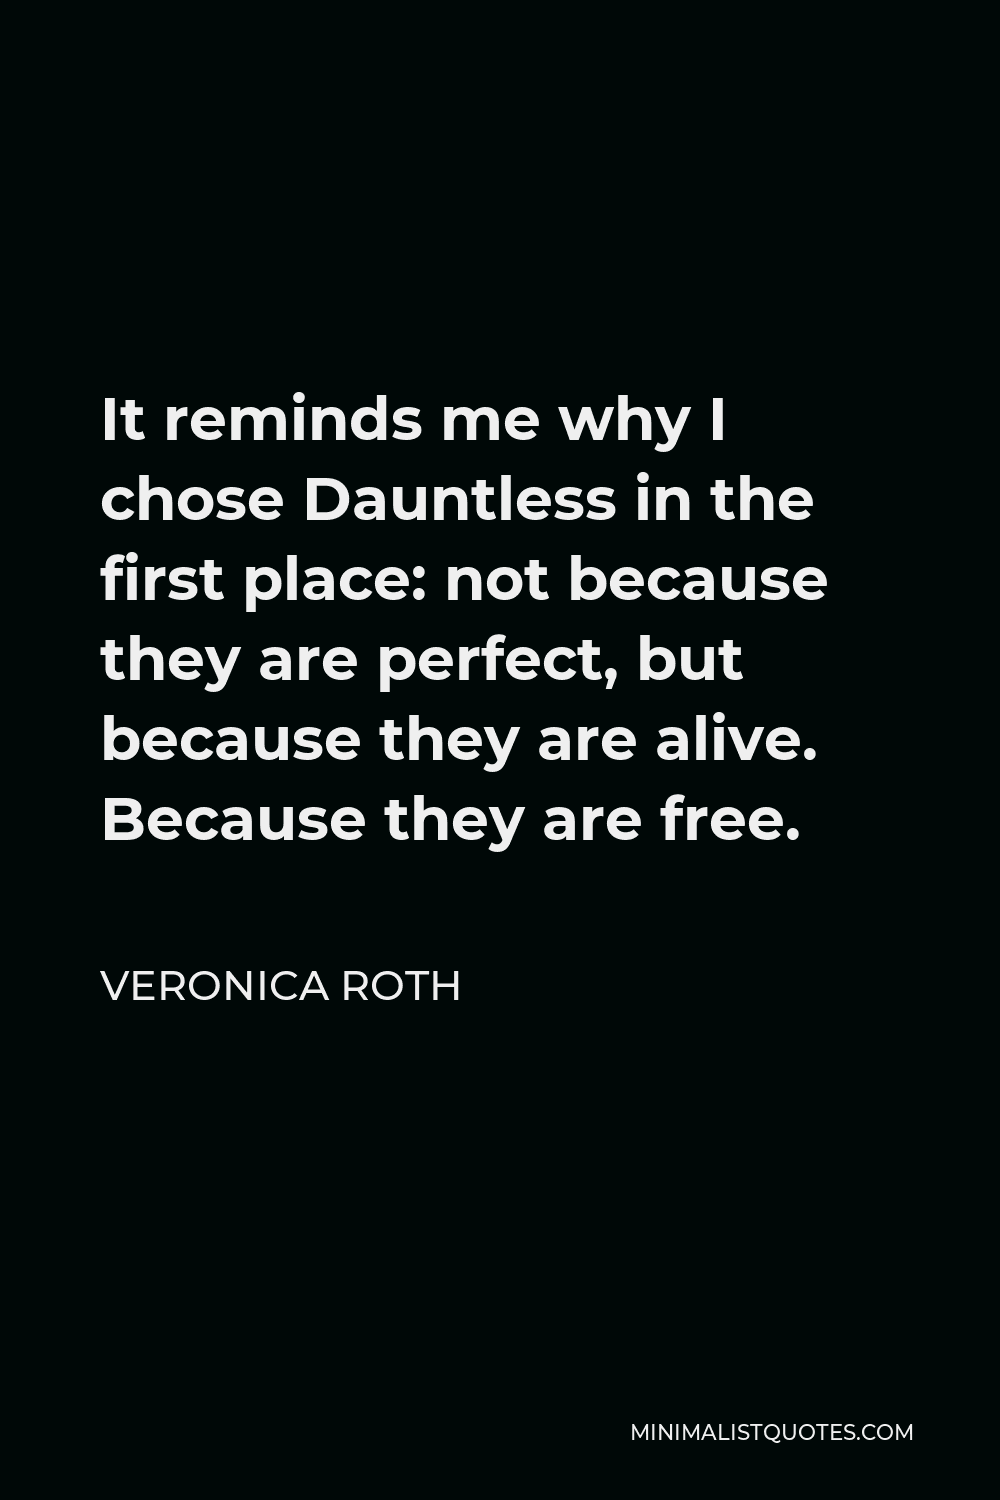 Veronica Roth Quote - It reminds me why I chose Dauntless in the first place: not because they are perfect, but because they are alive. Because they are free.